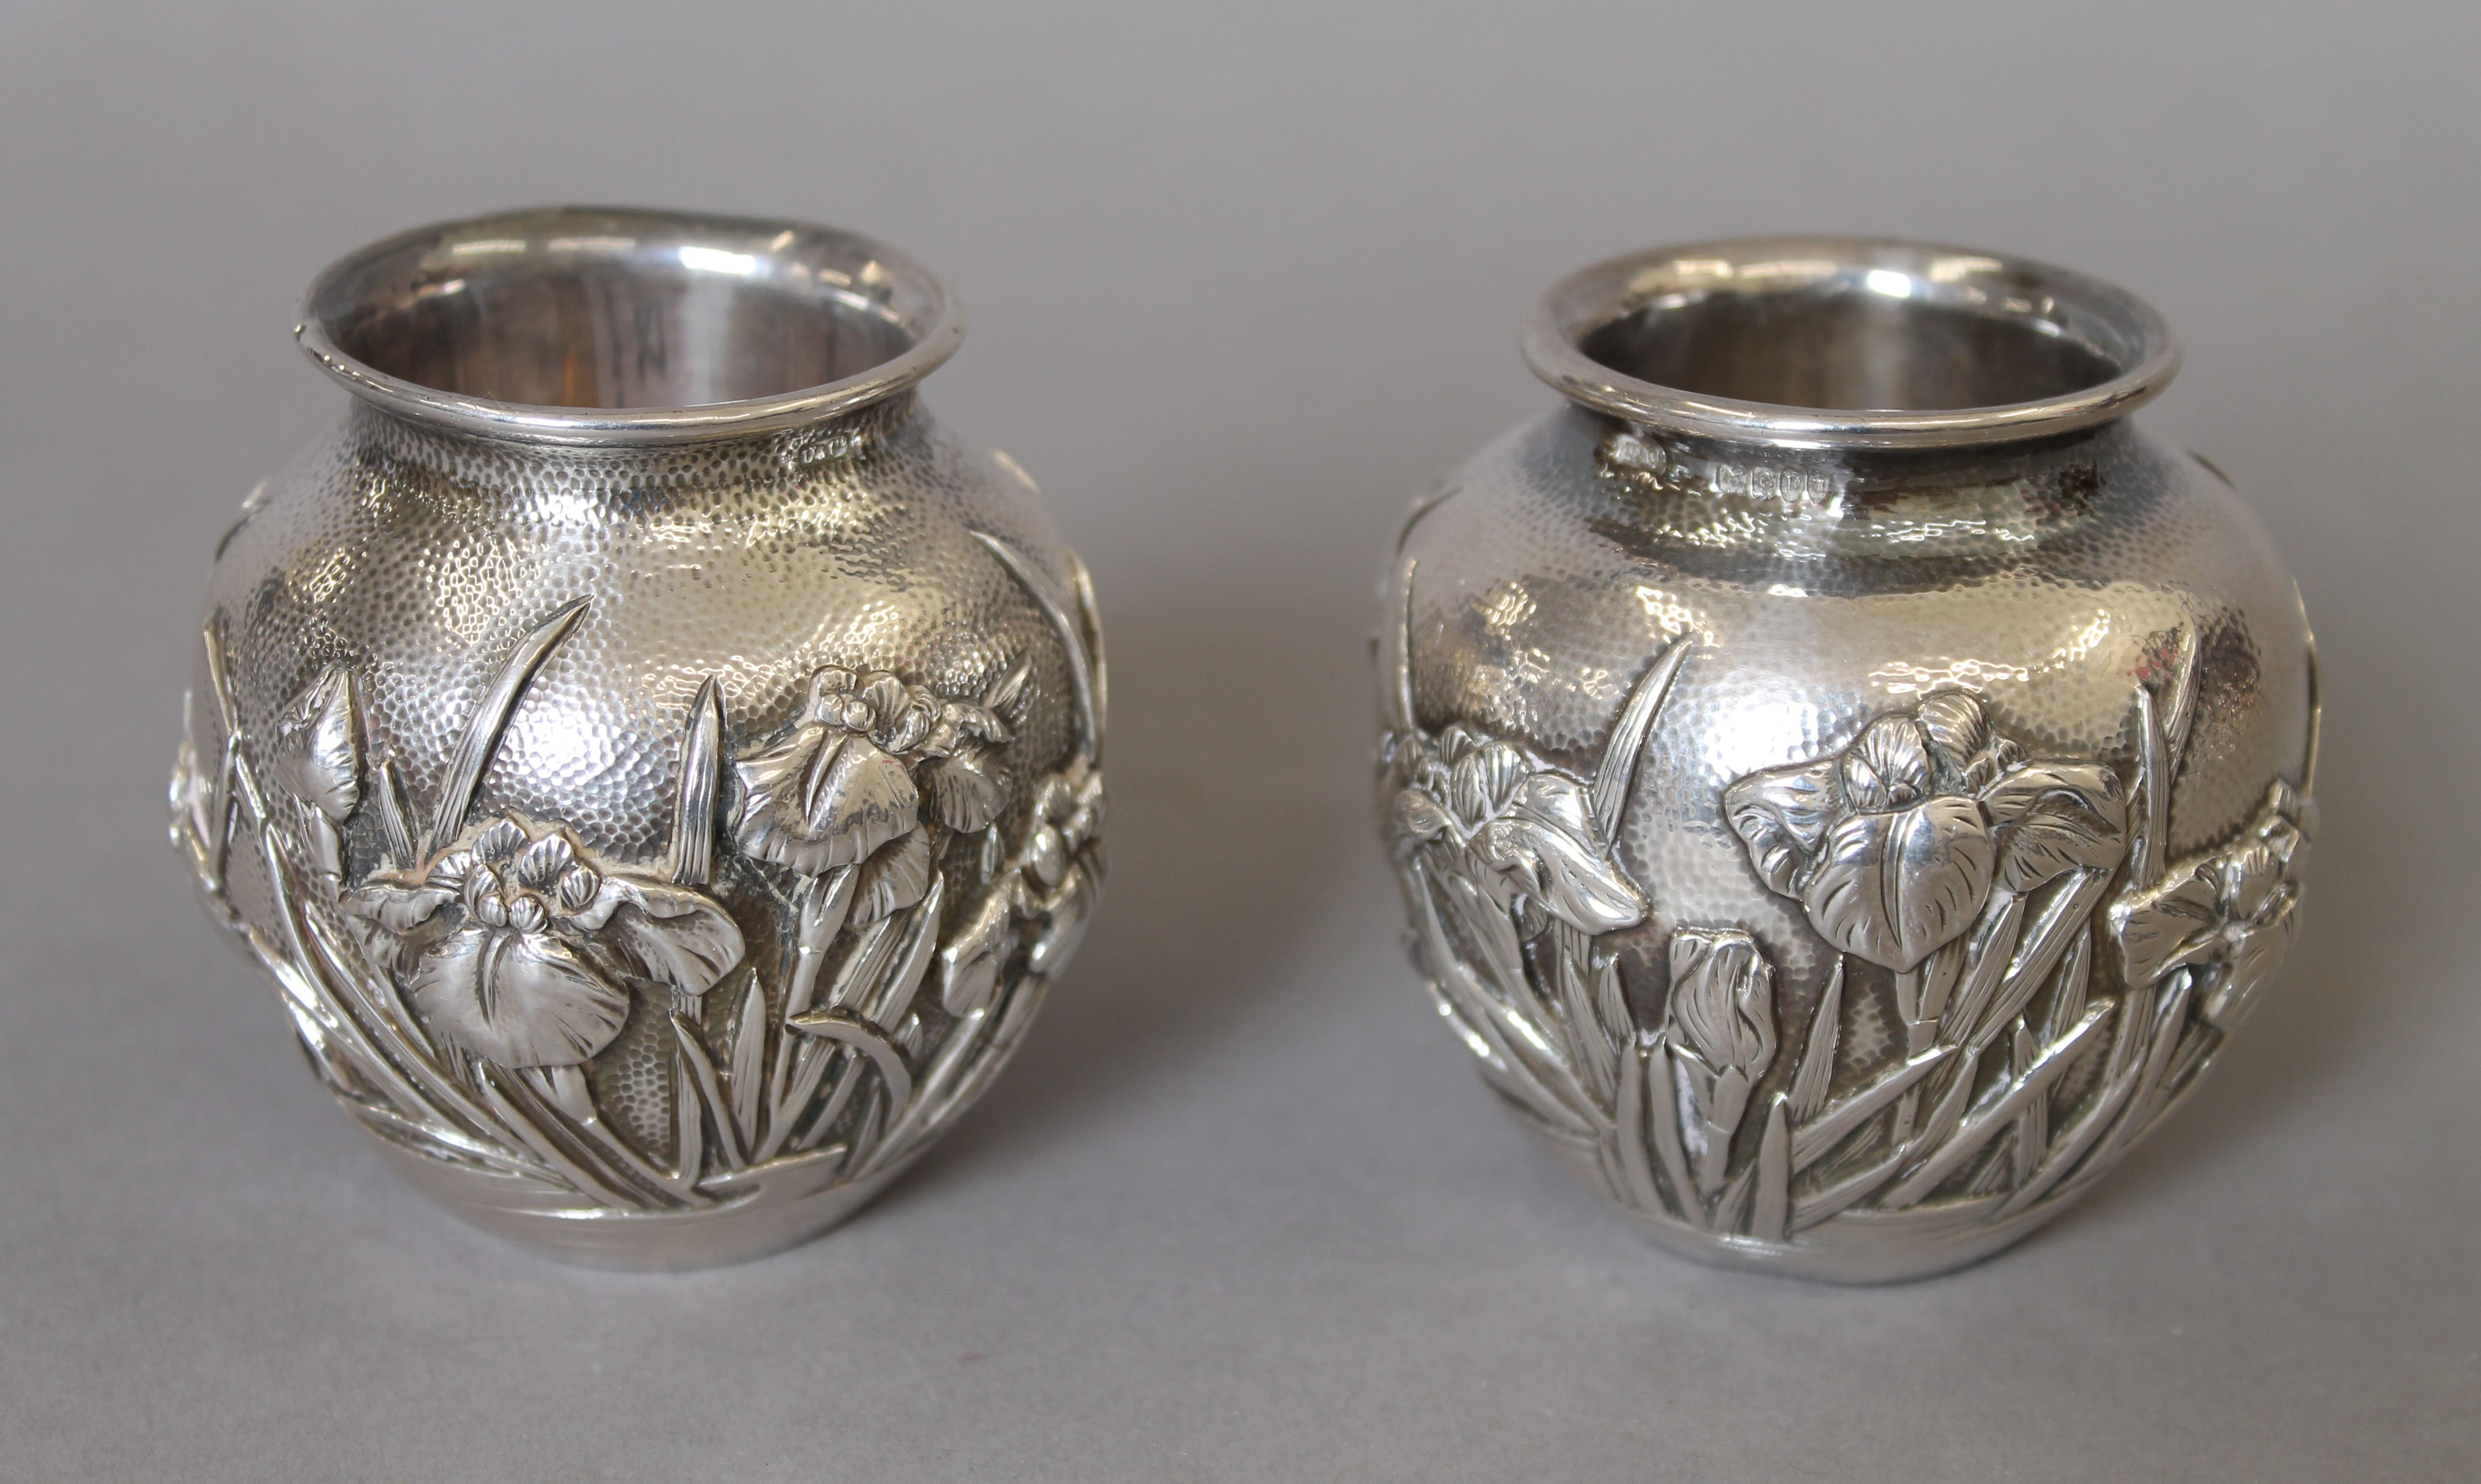 A pair of Japanese embossed silver vases, with Liberty & Co import marks. Each 6.5 cm high. 247.